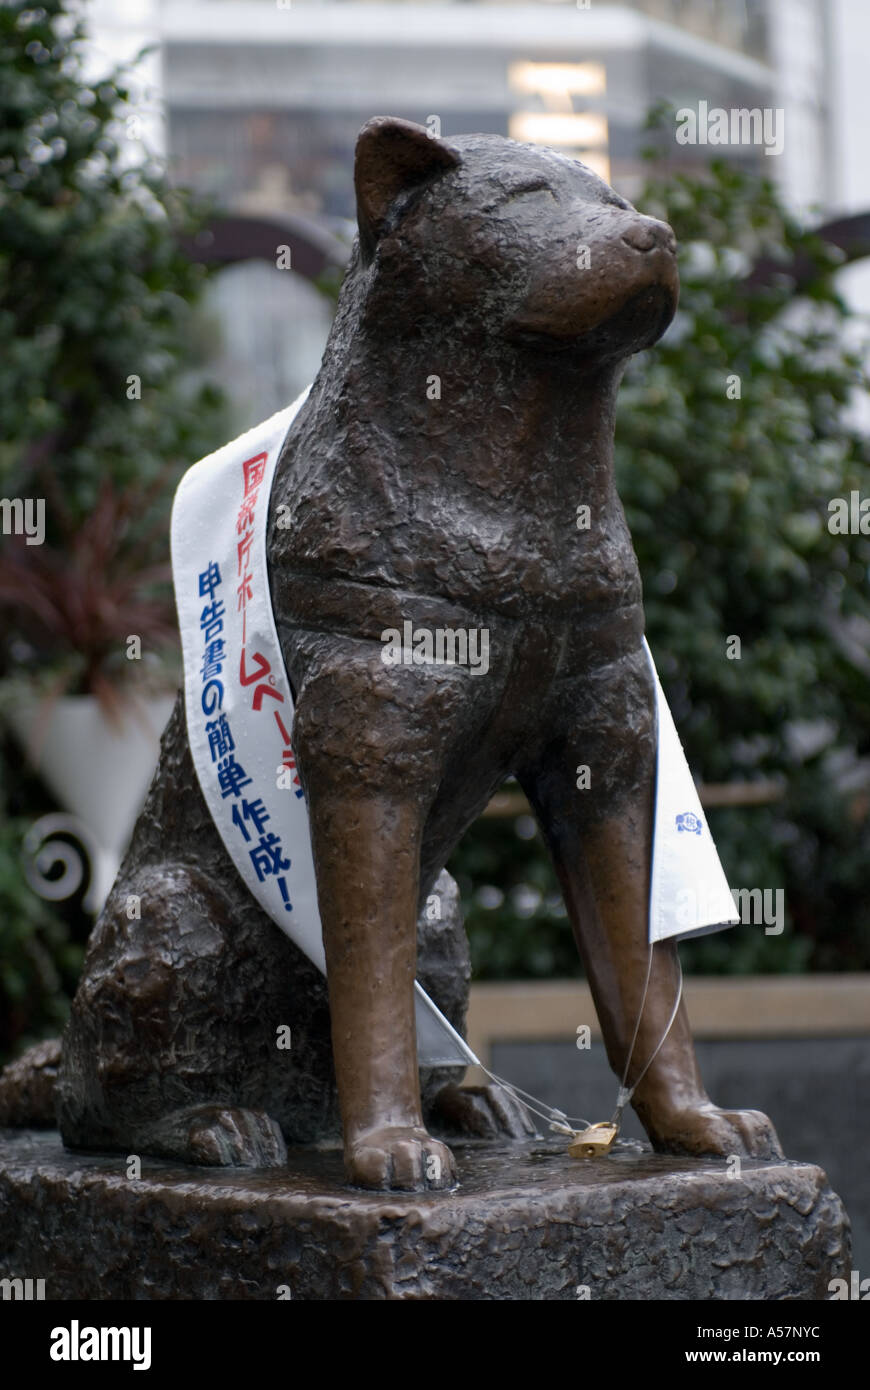 Sculpture of famous Hachiko the Dog at Hachiko Crossing in Shibuya Tokyo 2006 Stock Photo